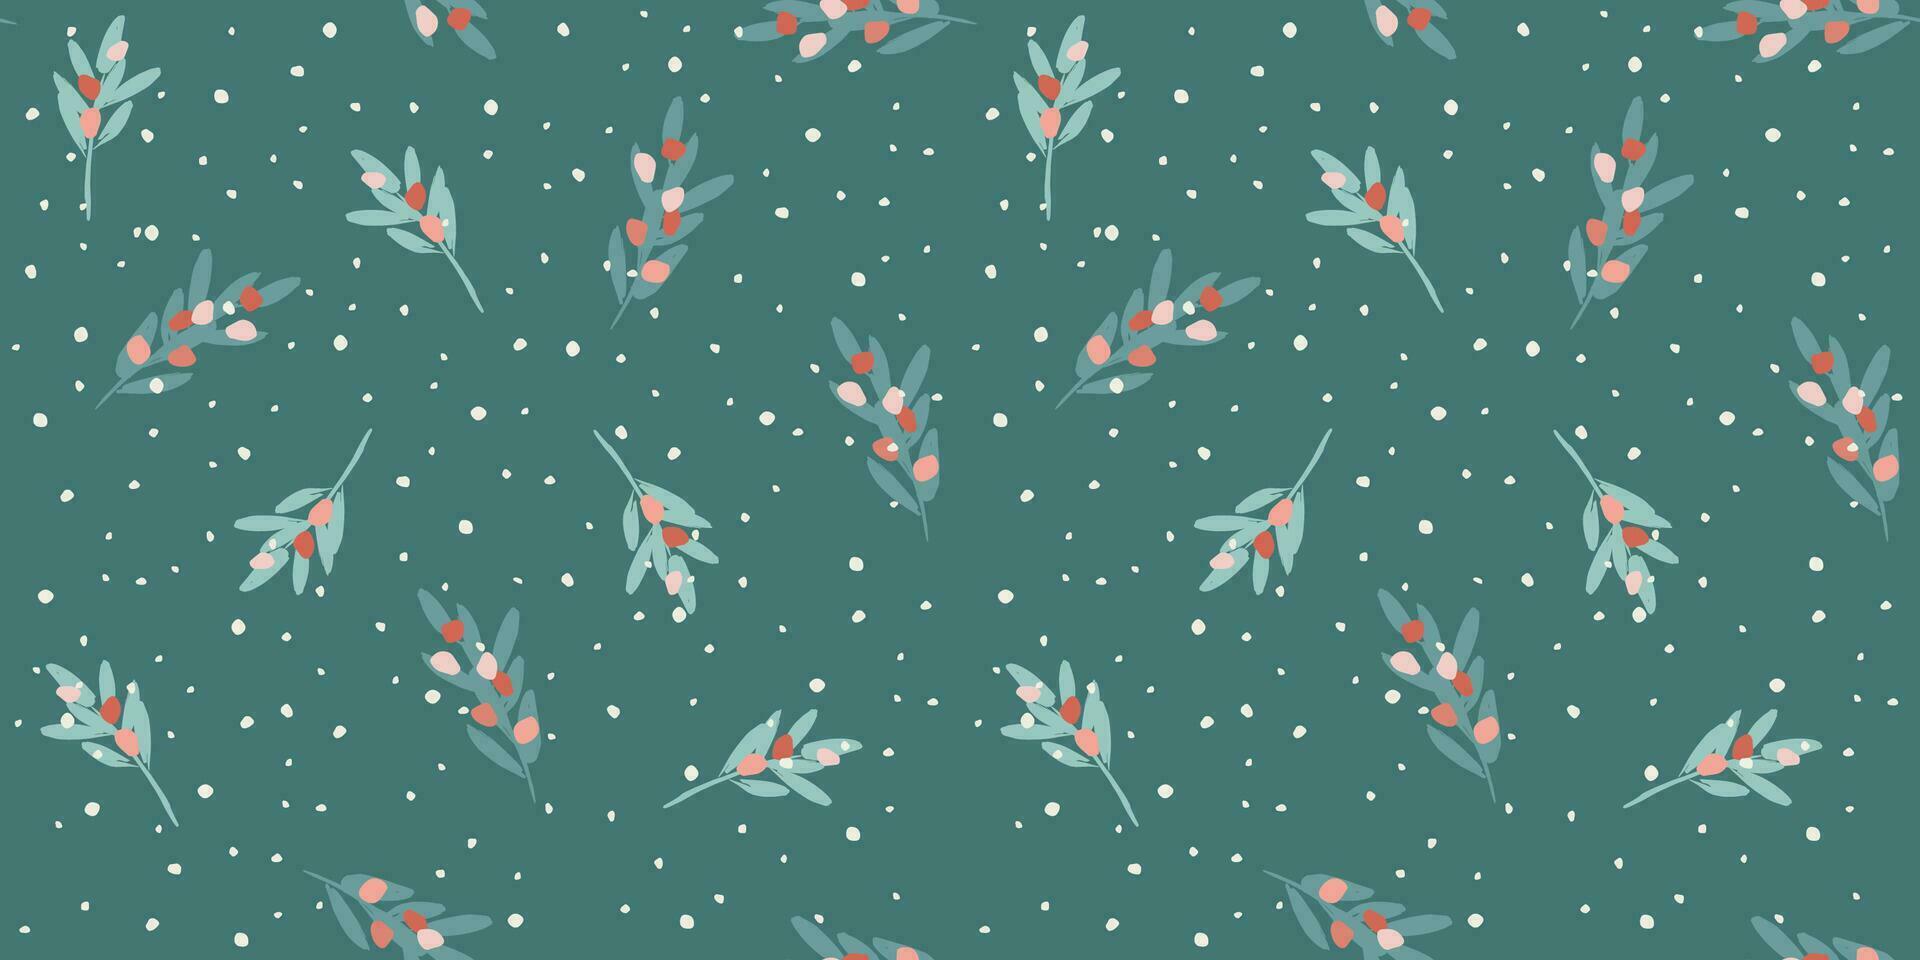 Christmas and Happy New Year seamless pattern. Branches, leaves, berries, snowflakes. New Year symbols.Trendy retro style. Vector design template.